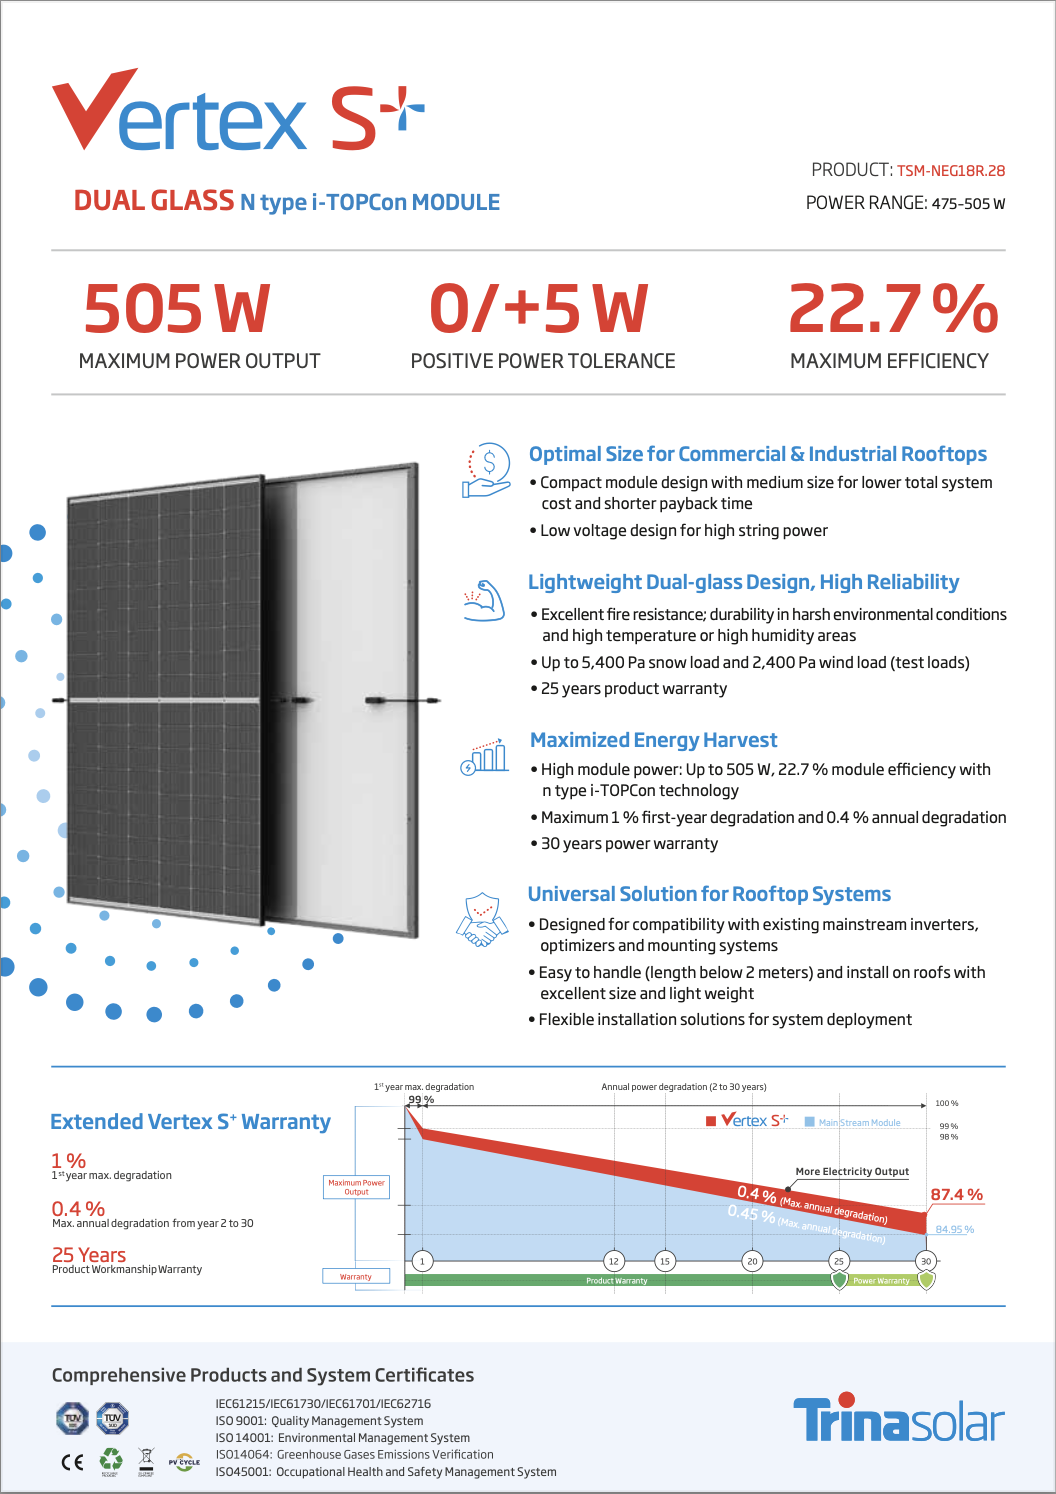 Trina Solar's Vertex S+ 505W Dual Glass N-type i-TOPCon Module datasheet, featuring a 505W maximum power output with 22.7% efficiency, ideal for commercial and industrial rooftops. The document details positive power tolerance, lightweight dual-glass design, high reliability, and extended 30-year power warranty, alongside performance graphs and system certifications.